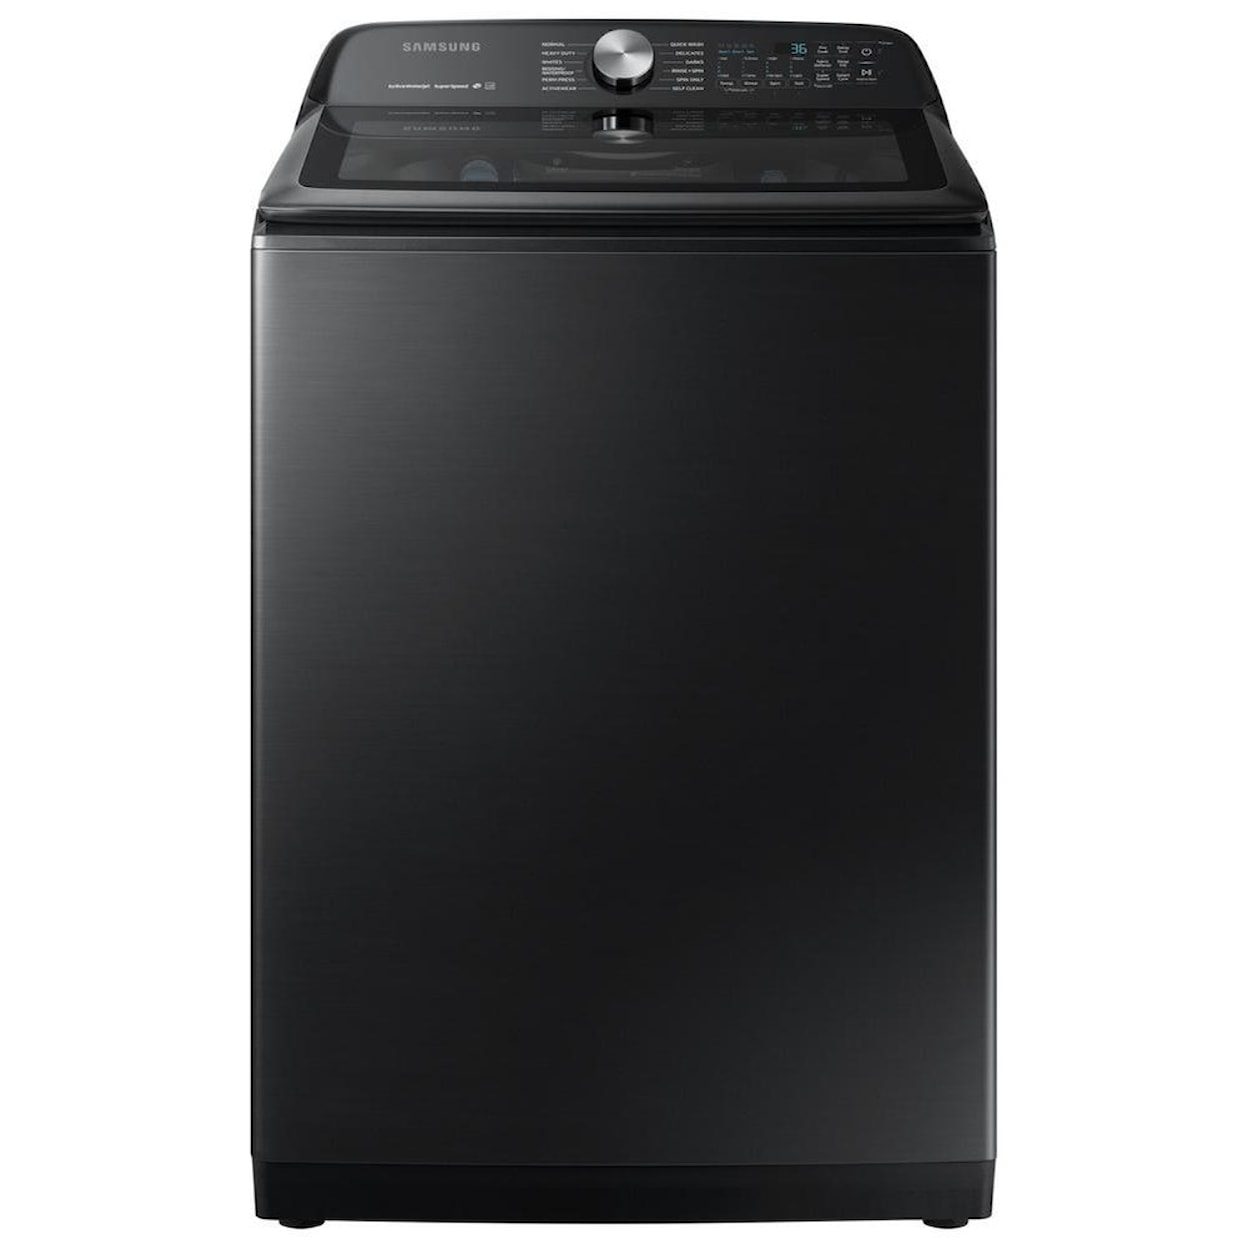 Samsung Appliances Top Load Washers - Samsung 5.0 cu. ft. Top Load Washer with Super Speed